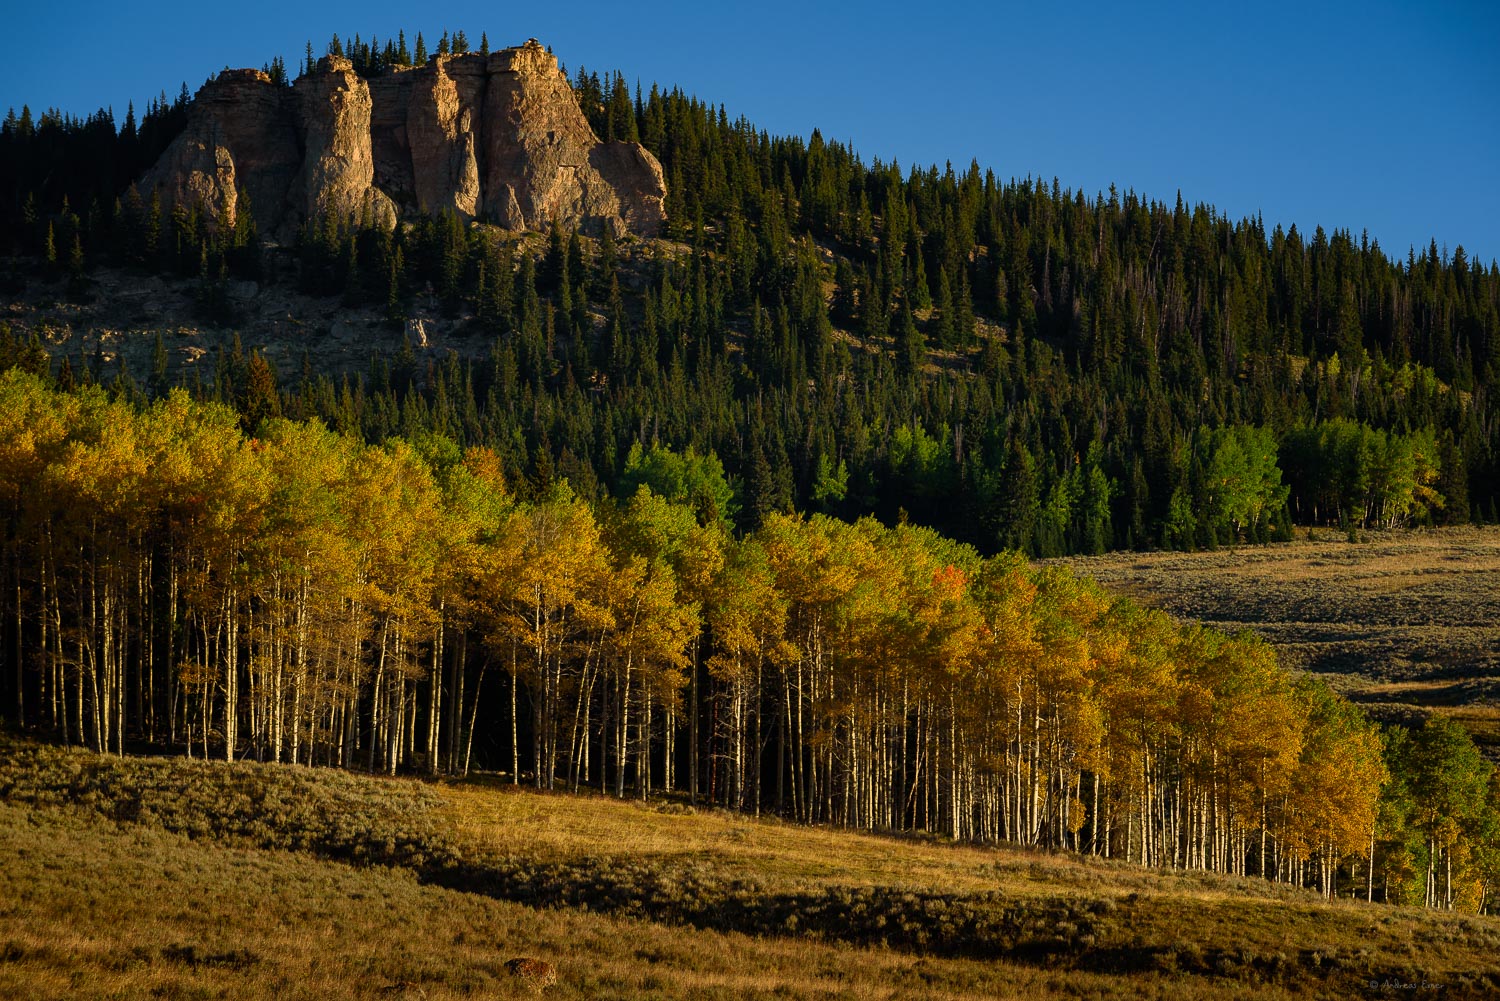 Rock cliffs and aspen grove, Bighorn Mountains, Wyoming